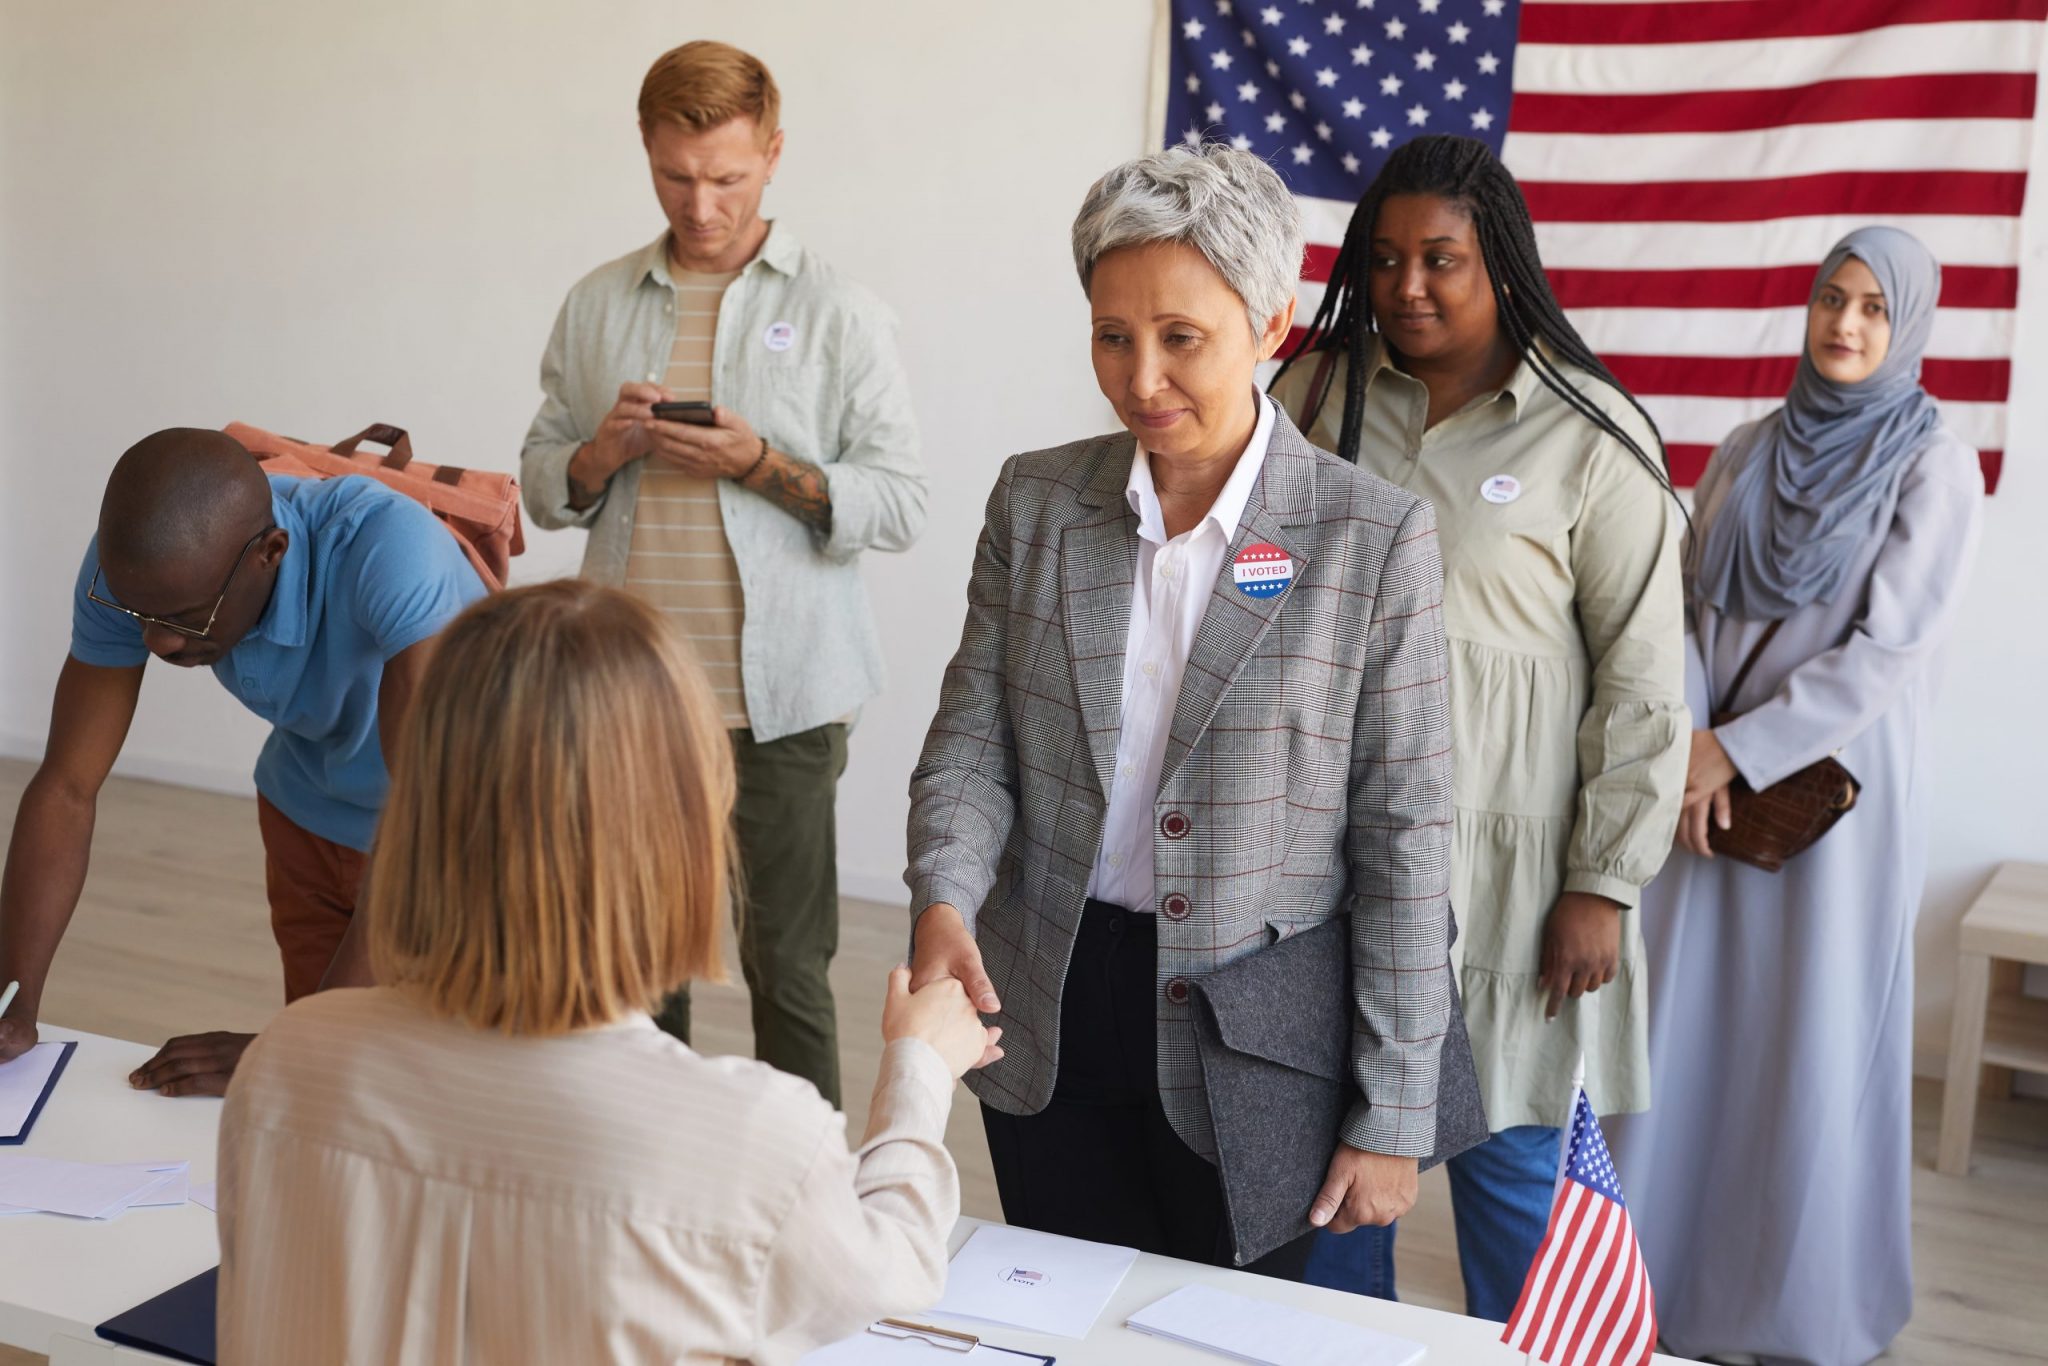 Multi-ethnic group of people at polling station decorated with American flags on election day, focus on smiling senior woman shaking hands with voting official, copy space